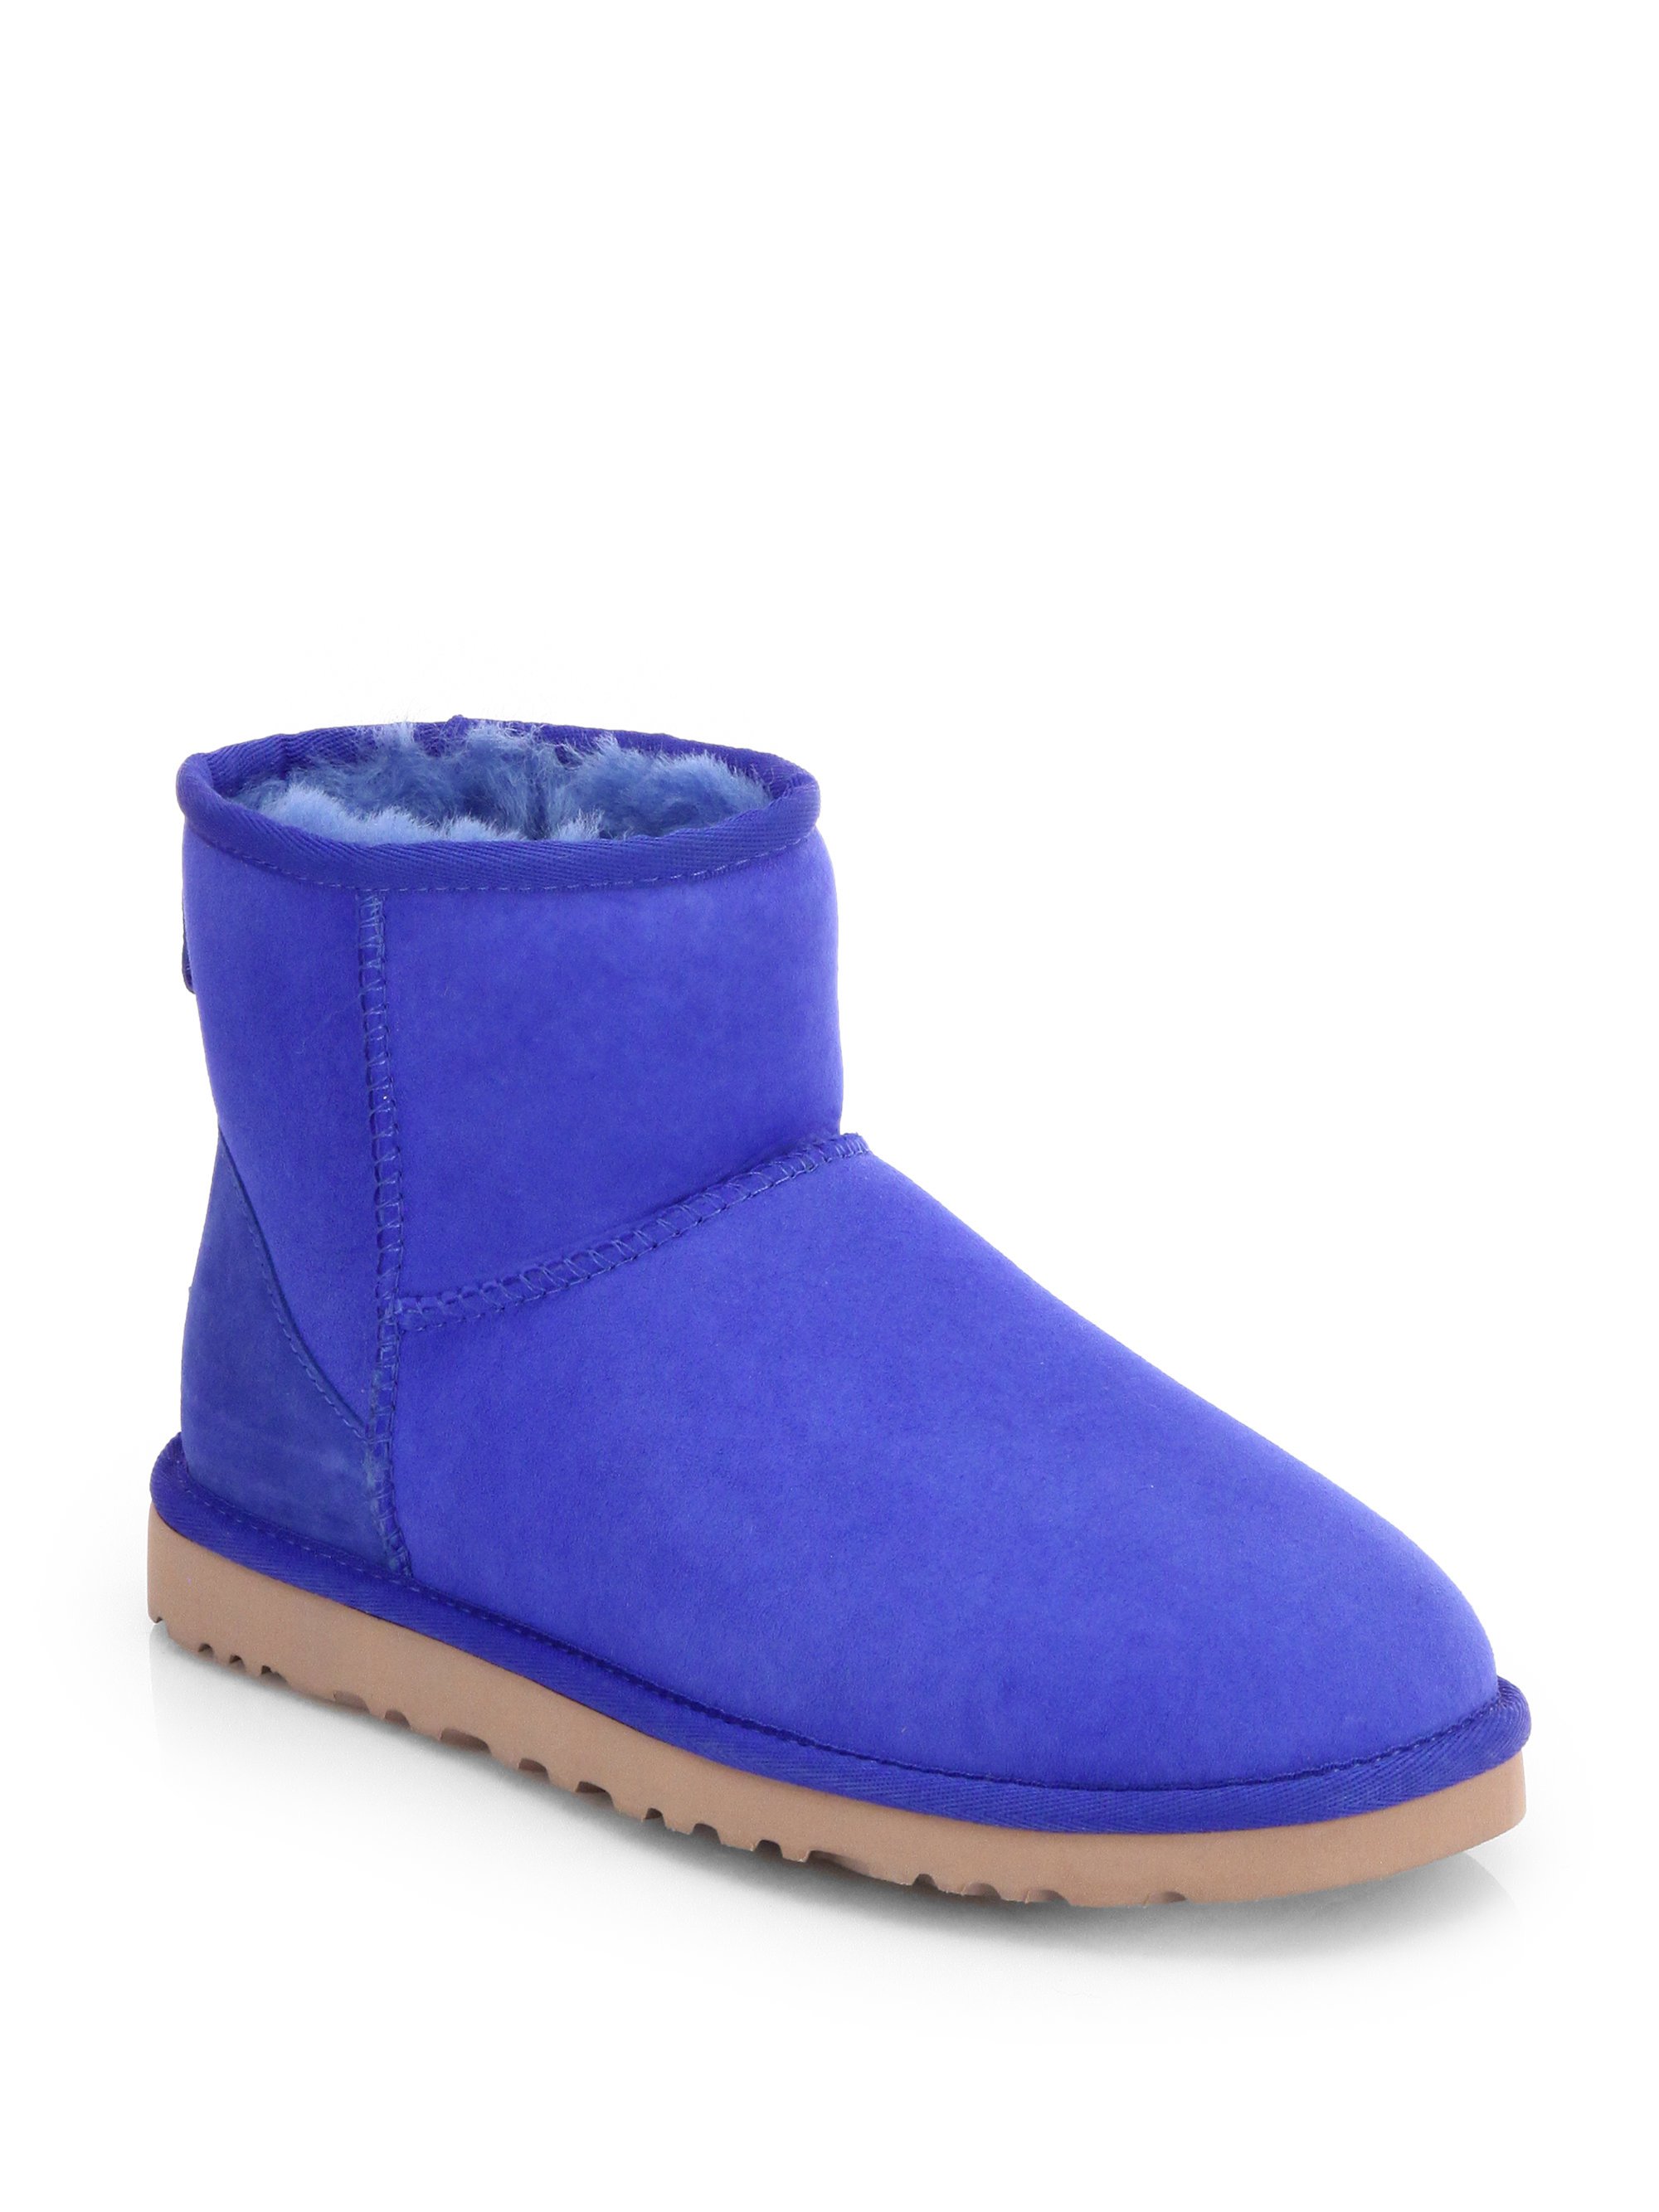 UGG Classic Mini Suede Boots in 